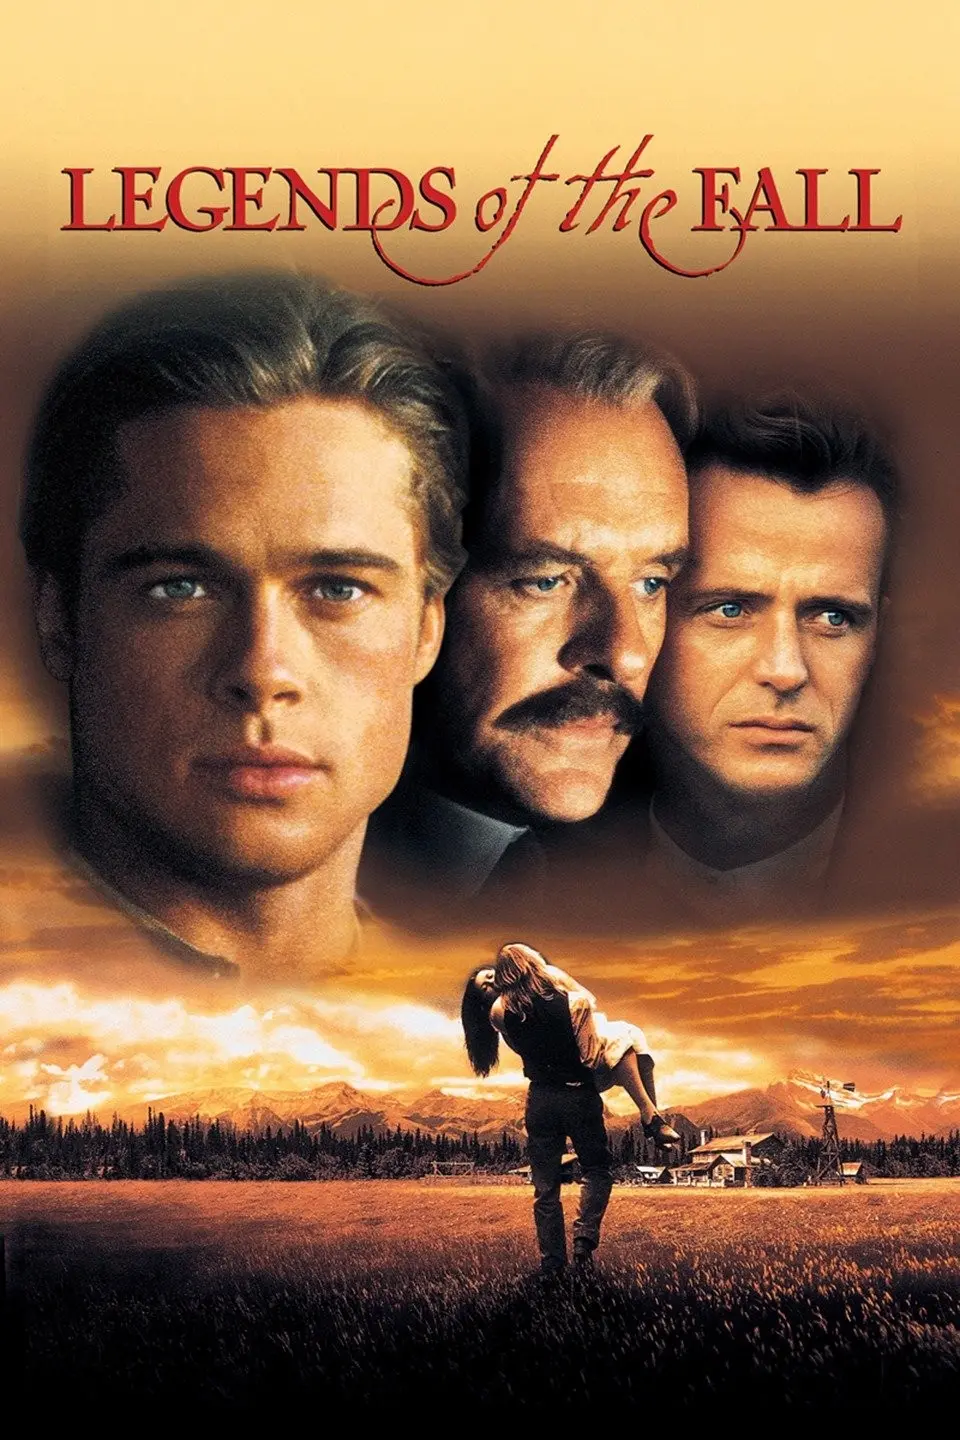 Legends of the Fall (1994)
